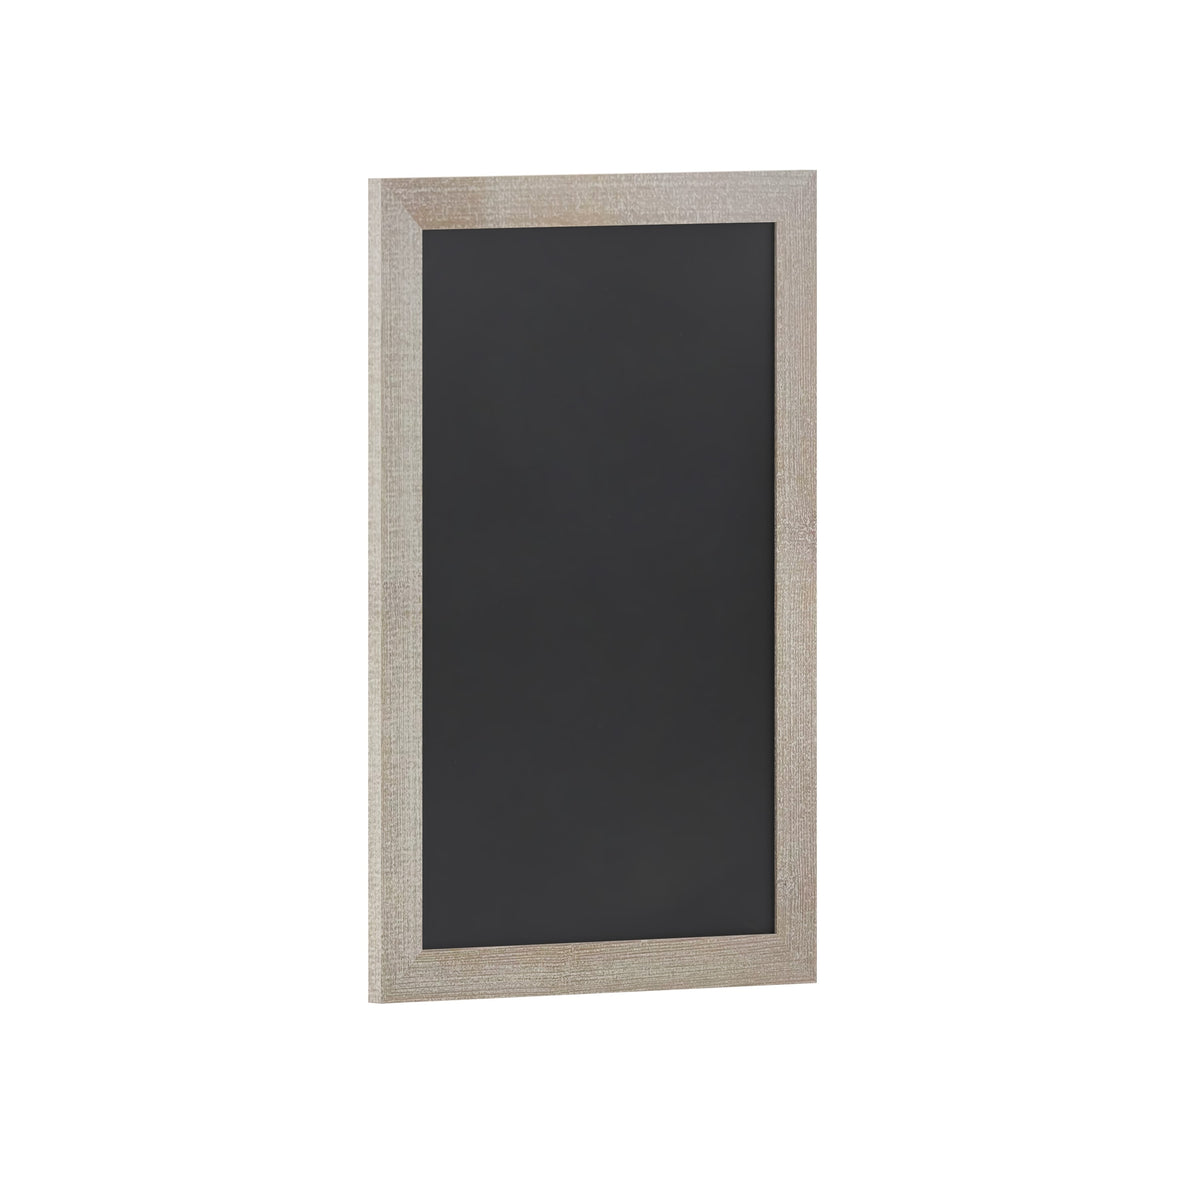 Weathered Brown,20inchW x 0.75inchD x 30inchH |#| 20inch x 30inch Wall Mounted Magnetic Chalkboard with Wooden Frame -Weathered